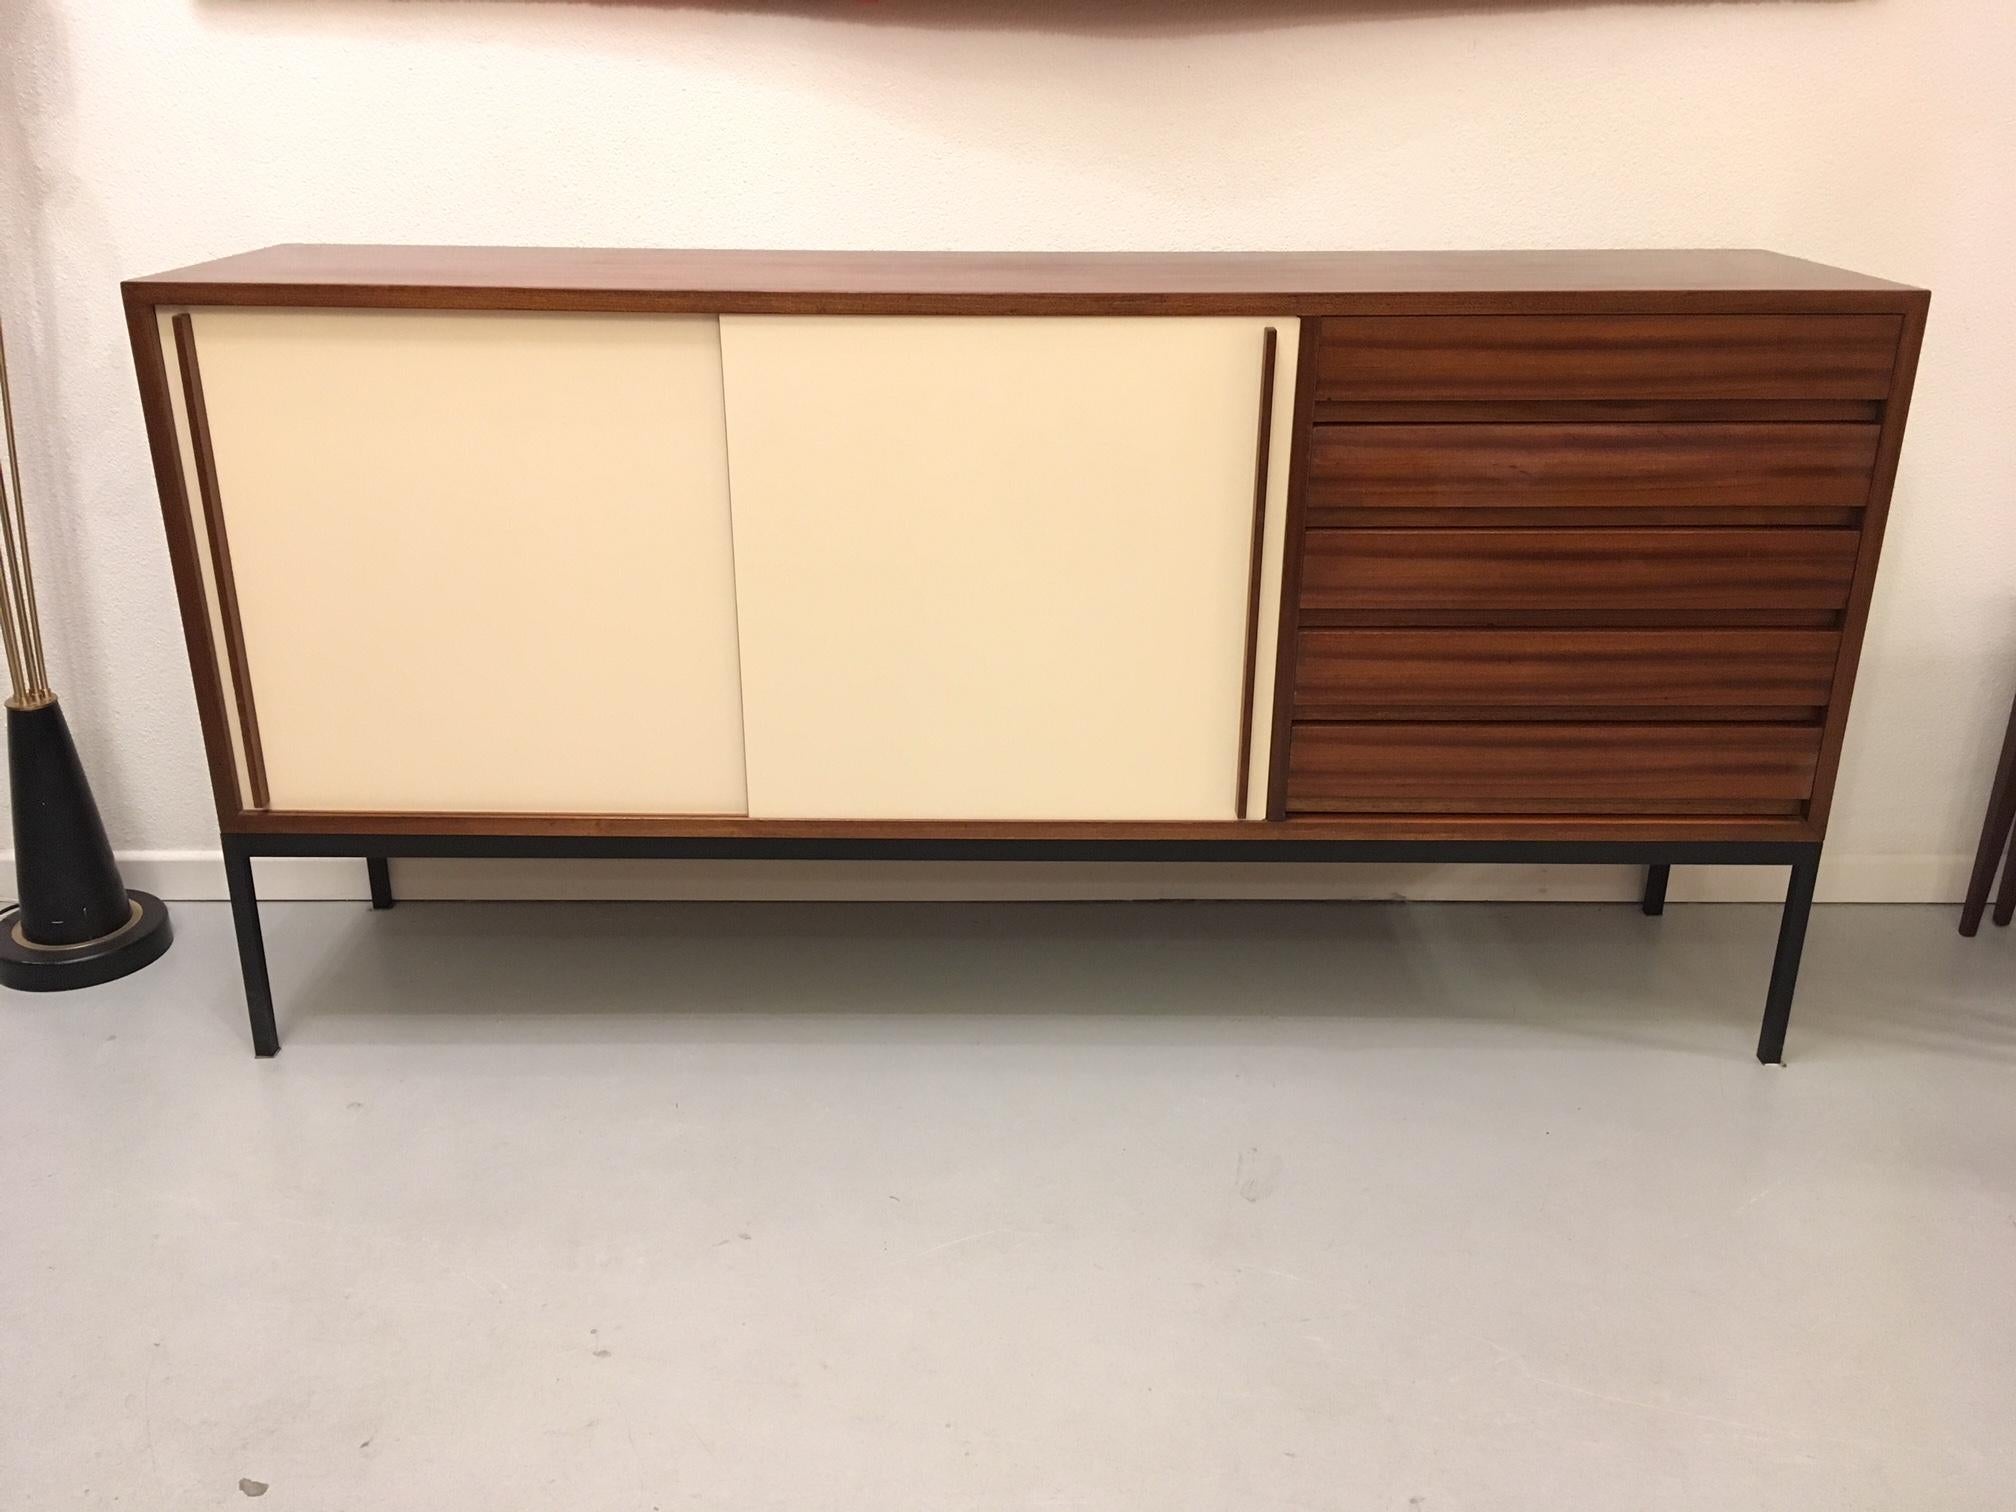 Swiss mahogany sideboard made by Victoria AG, circa 1950s
2 whites sliding doors, 5 drawers, black painted metal base
In the style of Charlotte Perriand.